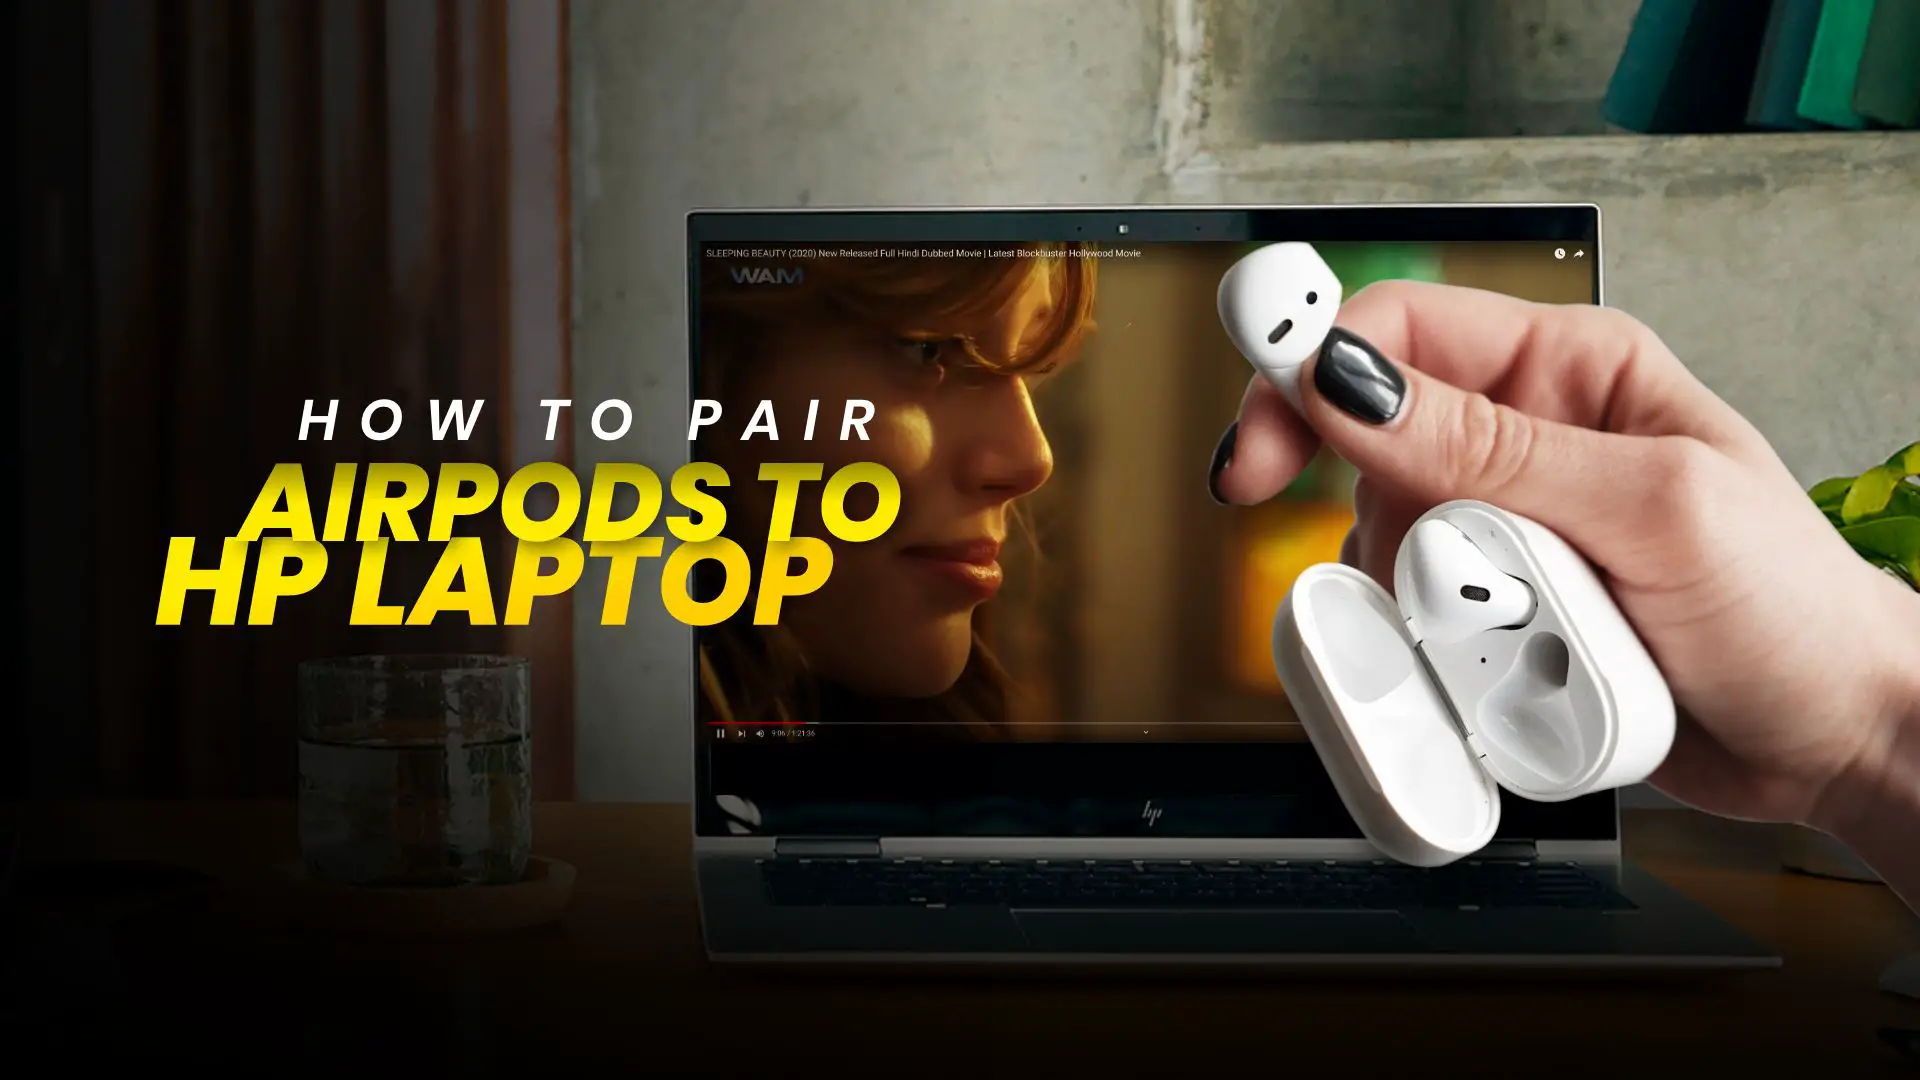 Hervat Overdreven Registratie How to Pair AirPods to HP Laptop - Step by Step Guide